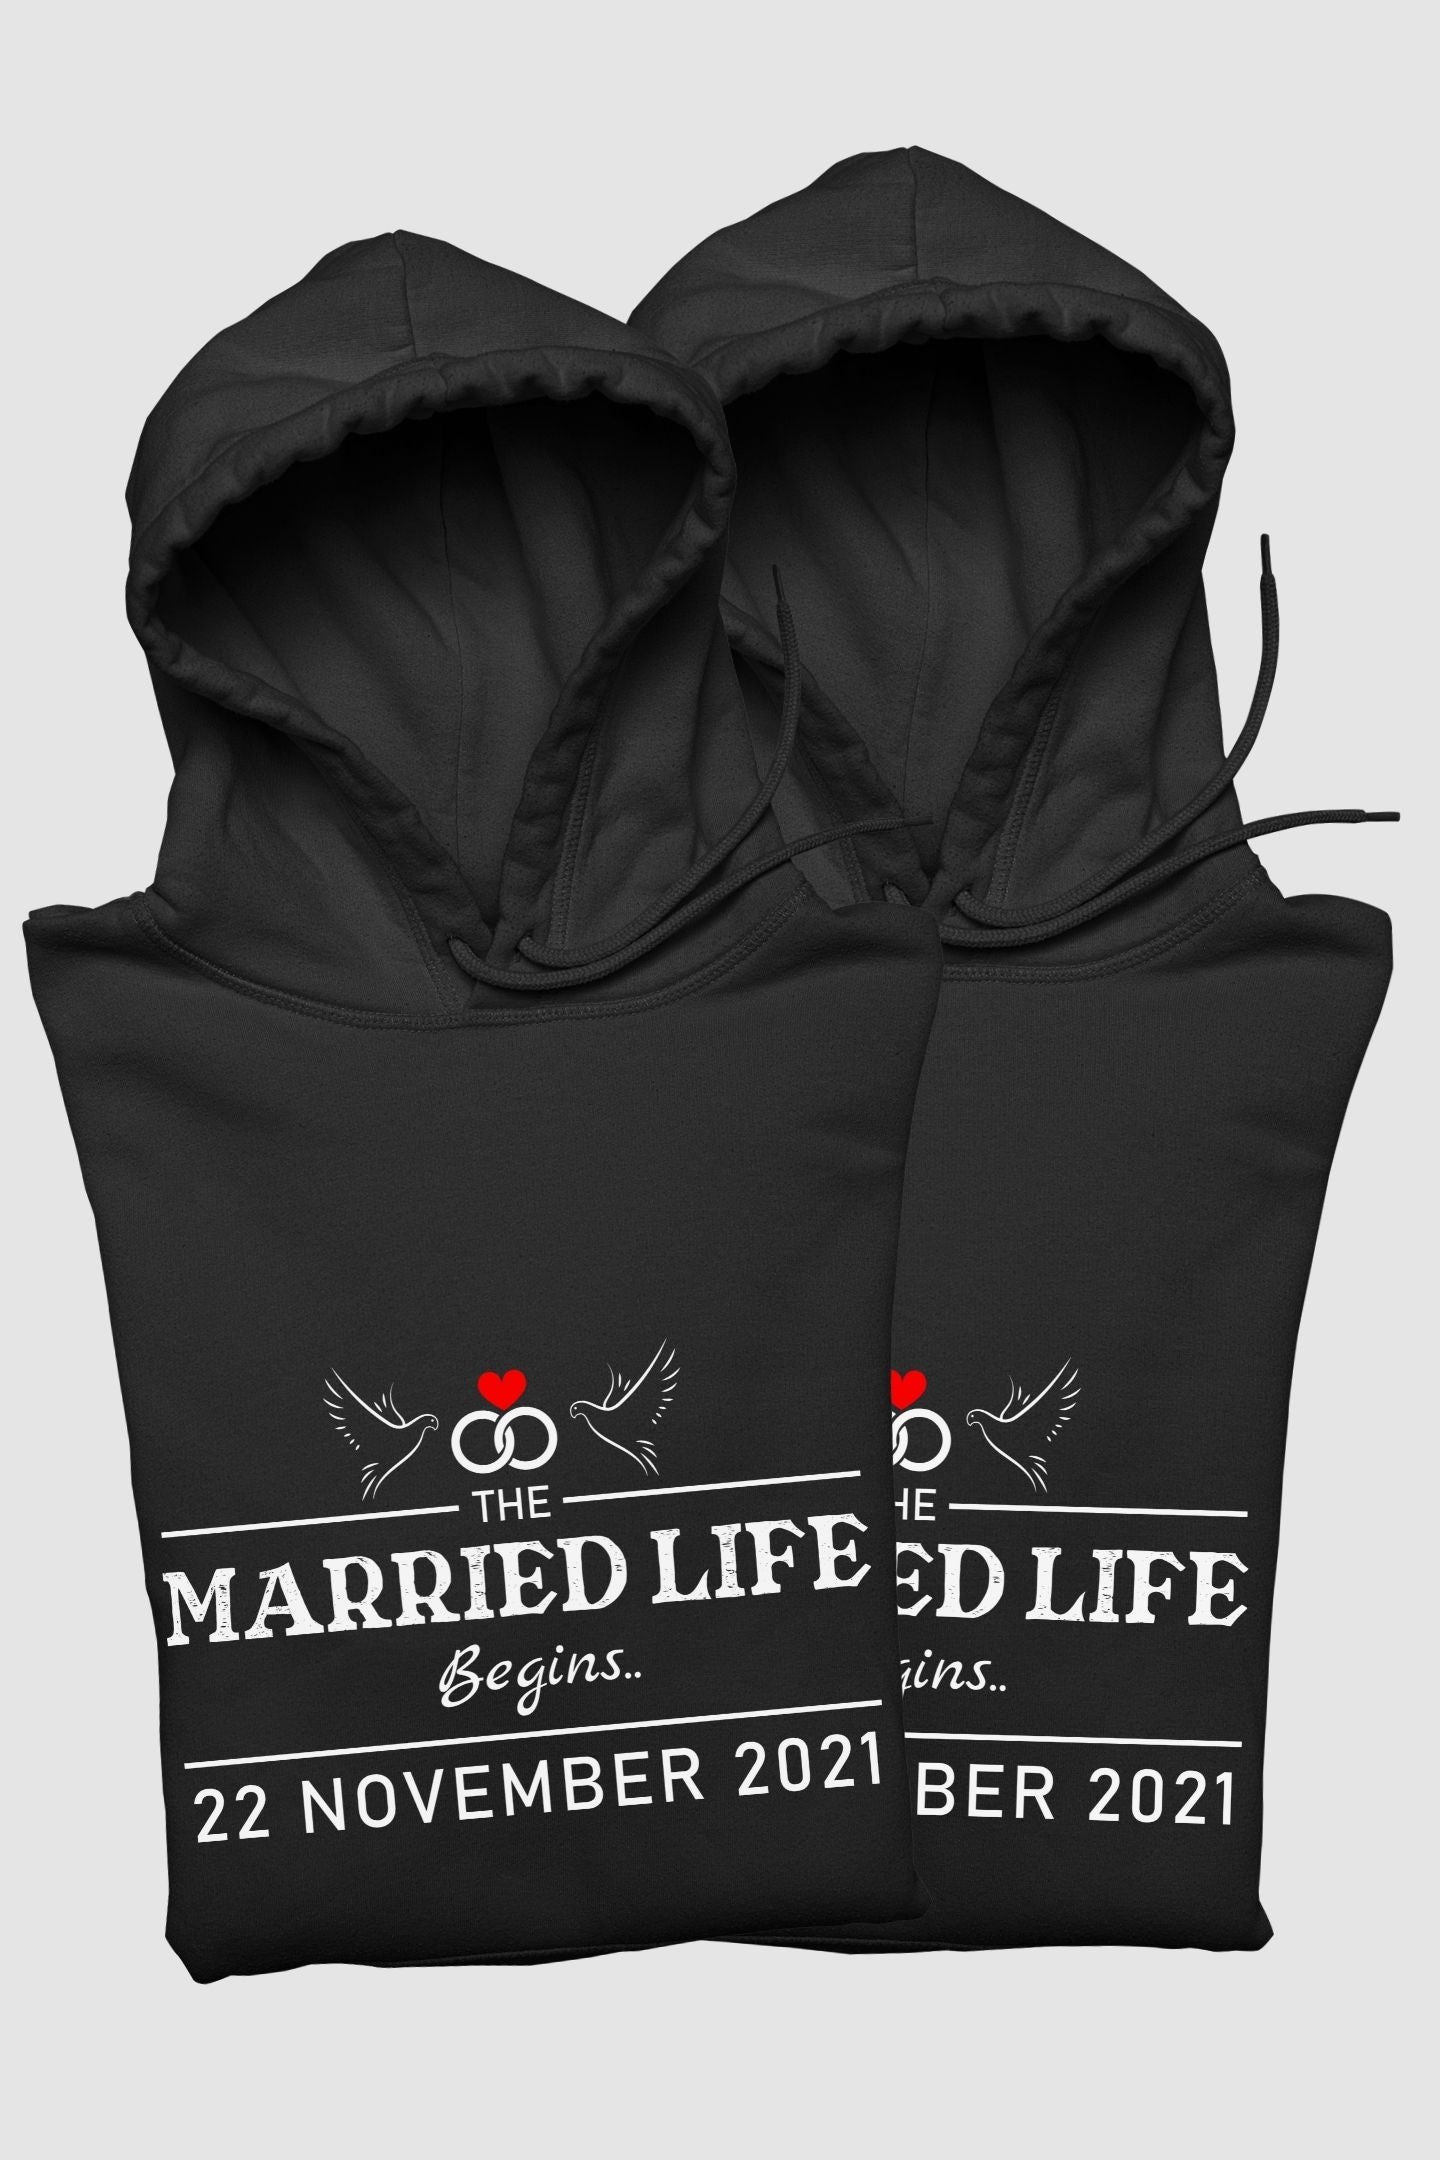 Marriage Date Announcement Customized Couple Hoodies